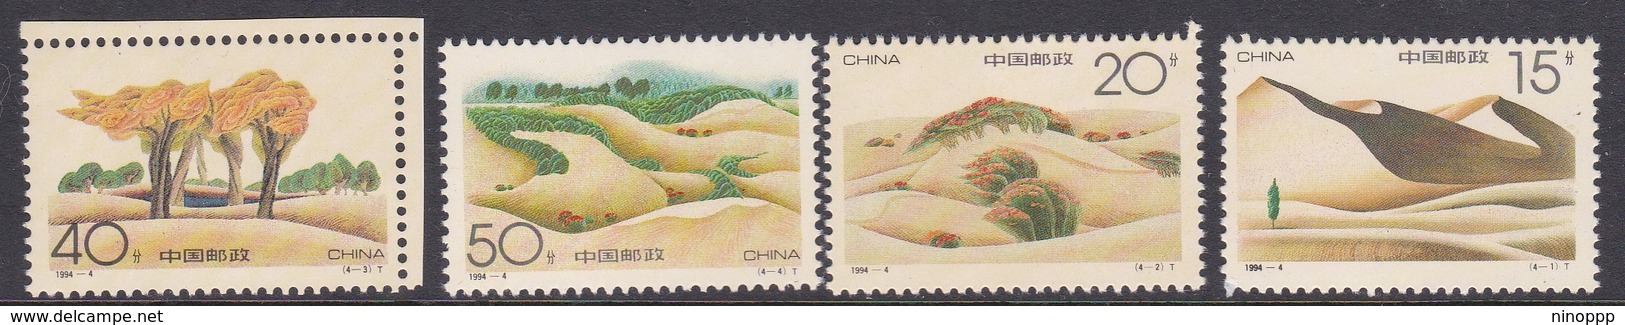 China People's Republic SG 3896-3899 1994 Making The Desert Green, Mint Never Hinged - Neufs